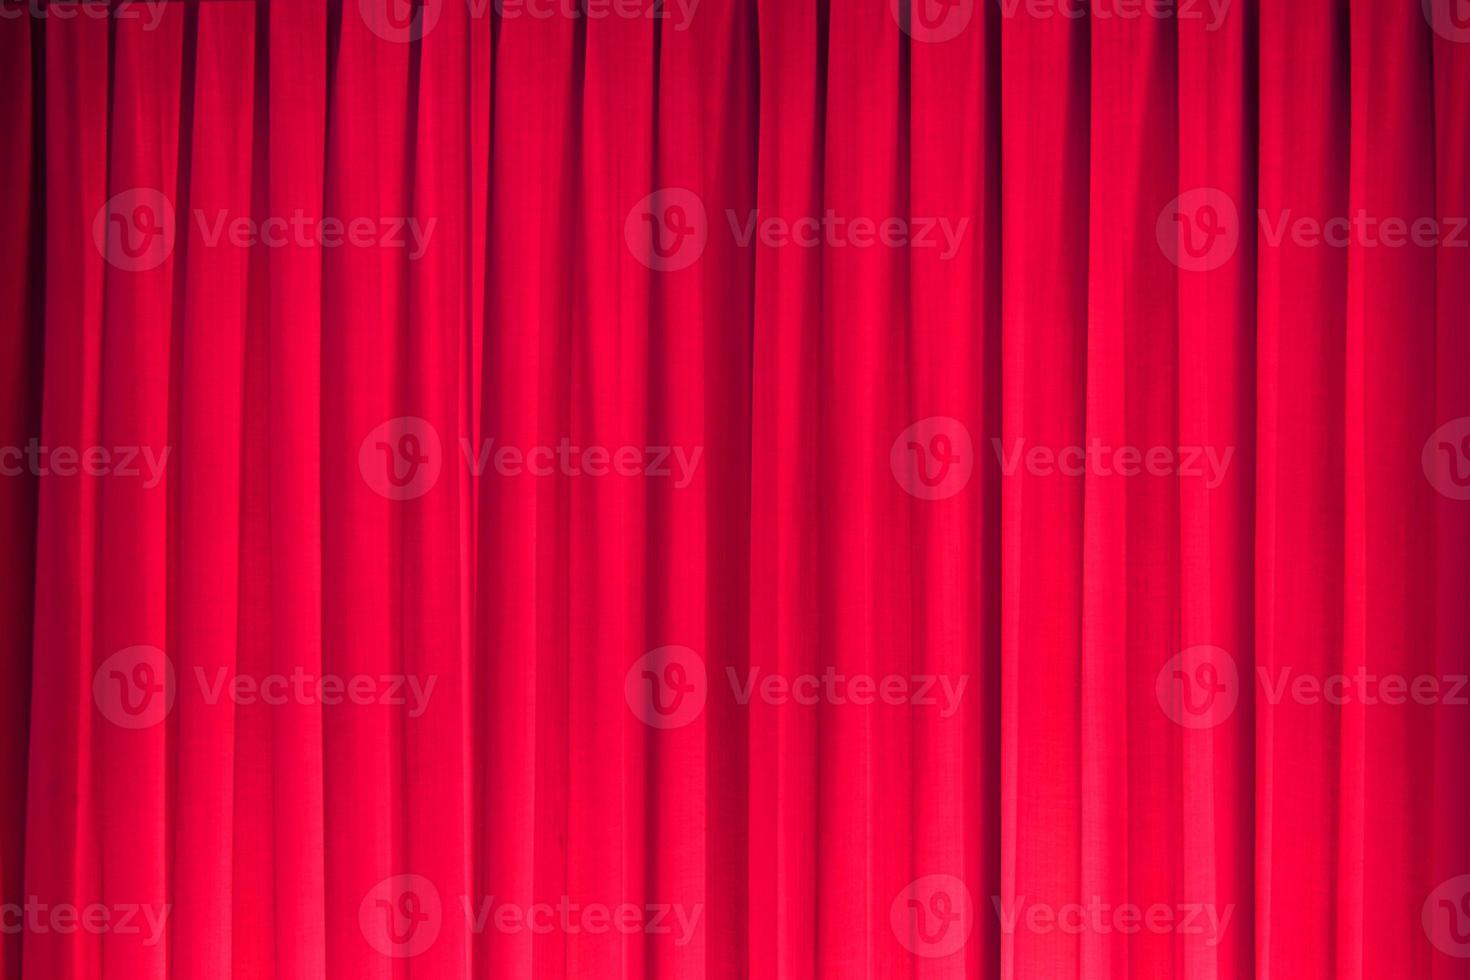 Stage Curtain. Curtain Background. Abstract background. diagonal lines and strips. photo